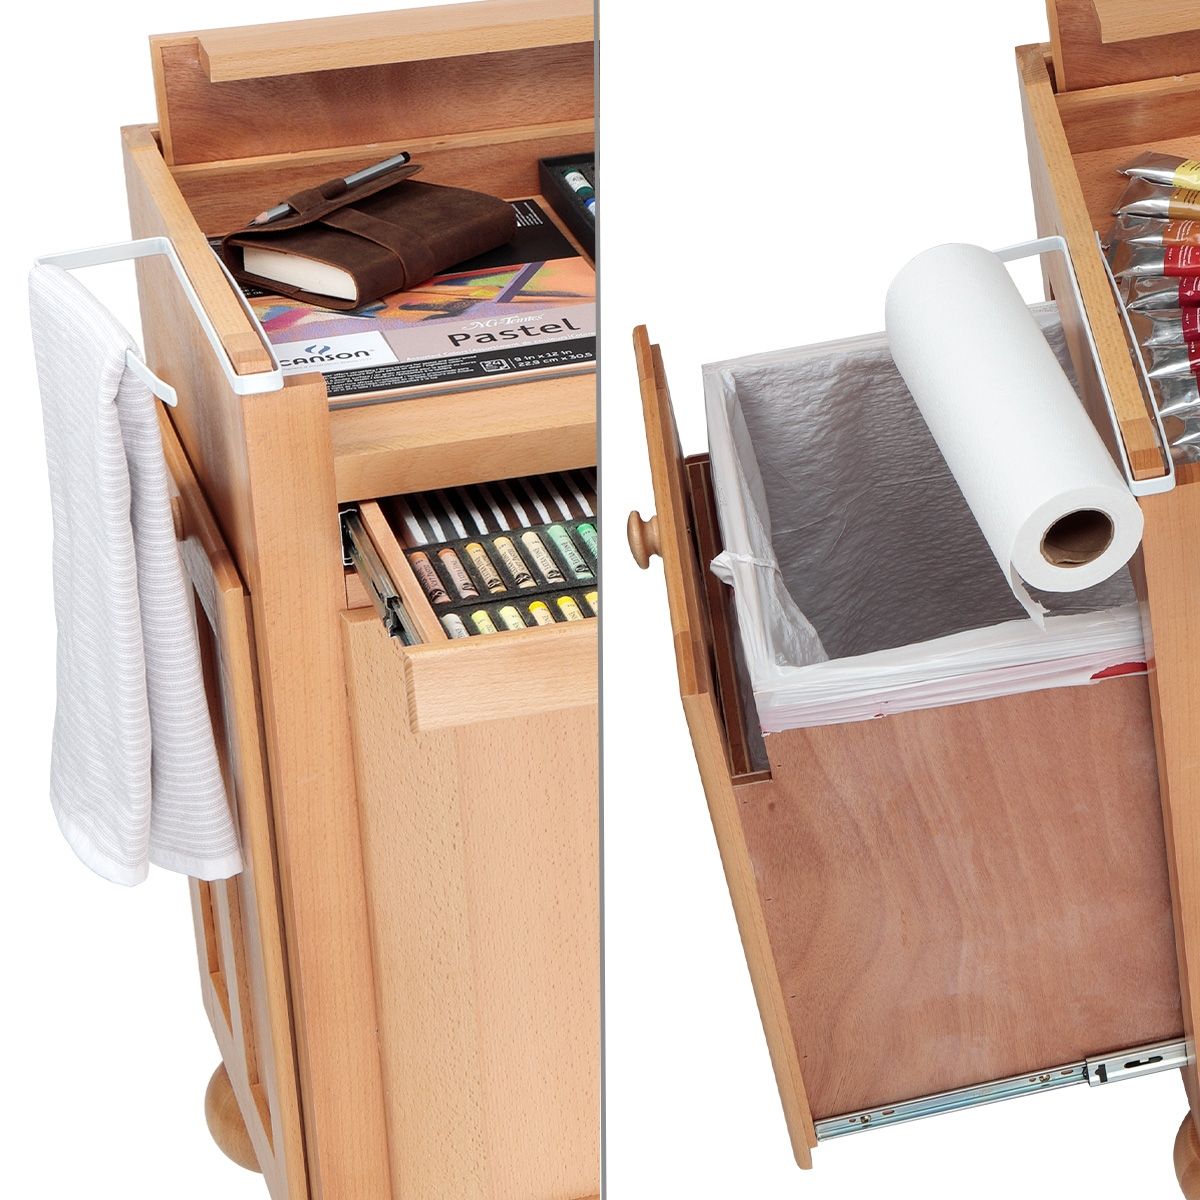 Paper or hand towel holder can be installed over trash bin